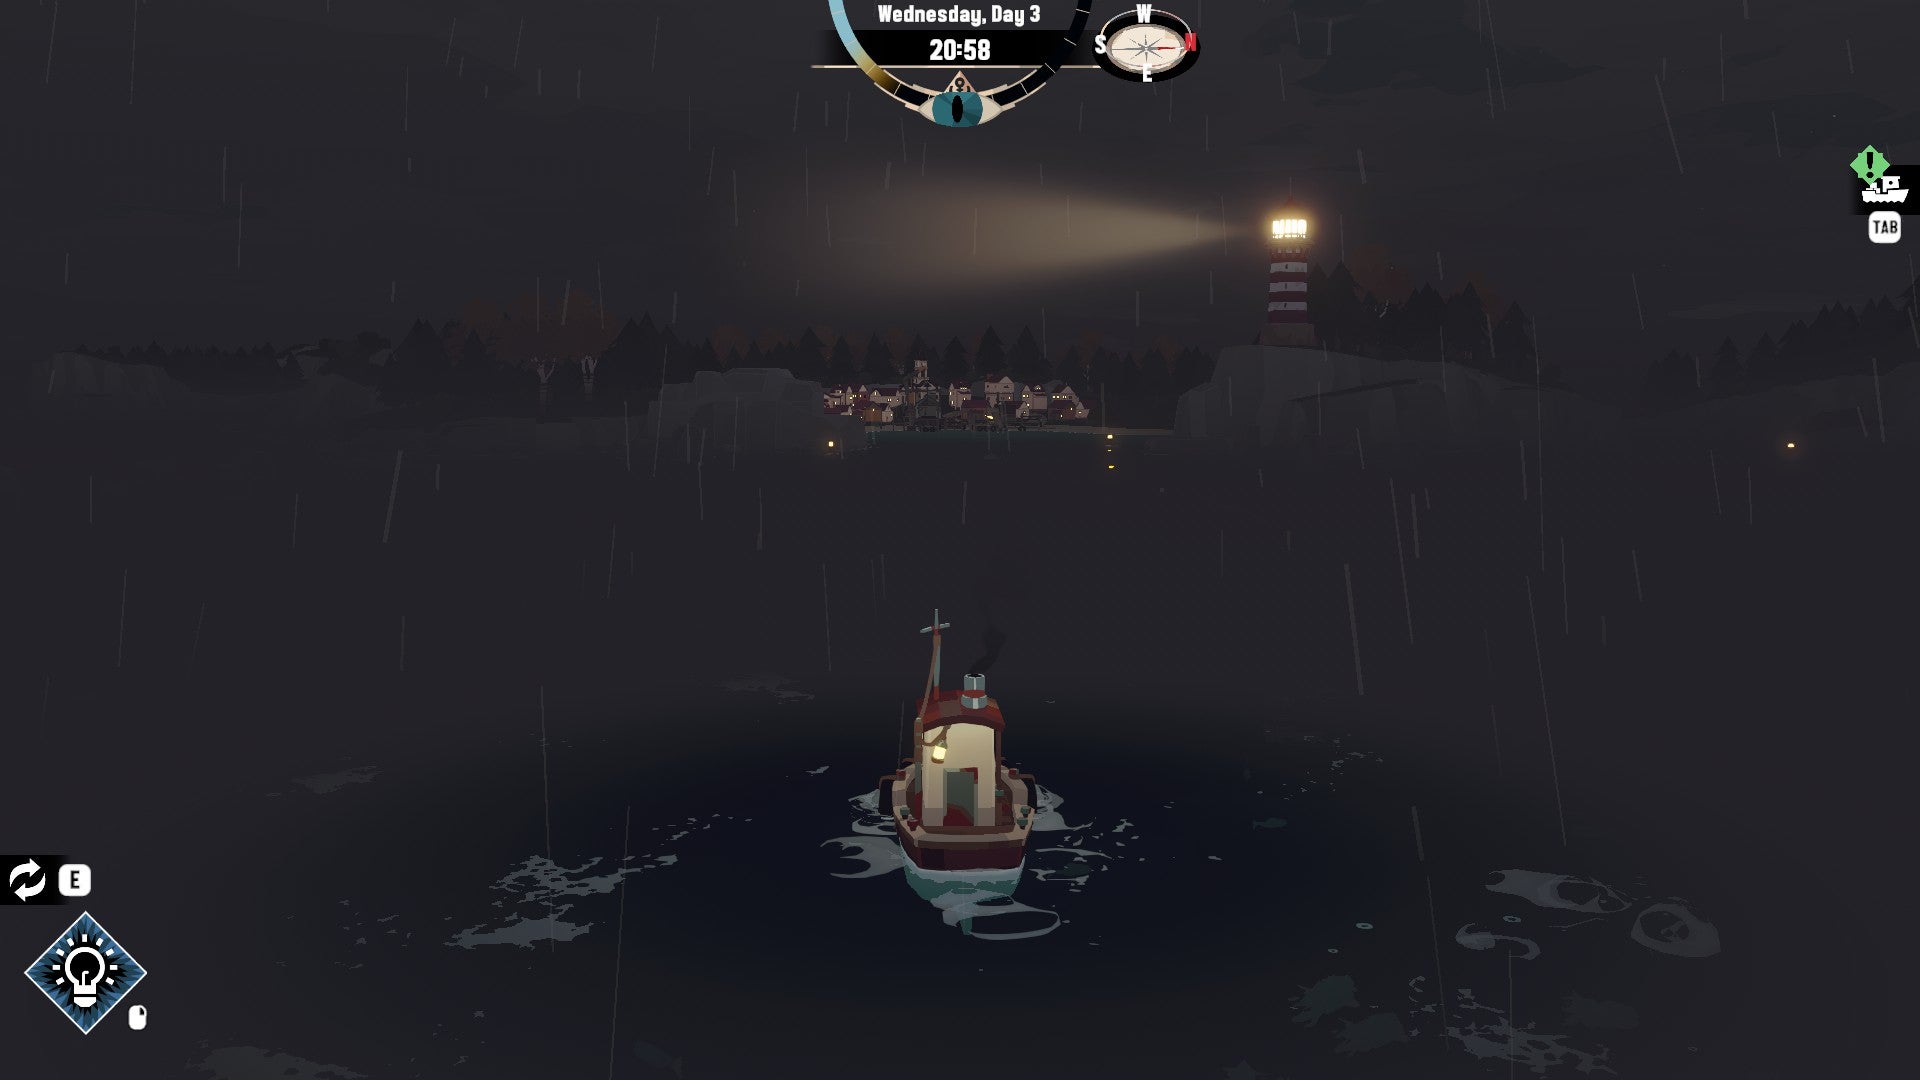 A Dredge screenshot showing a little tugboat sailing at nighttime through a thick fog.